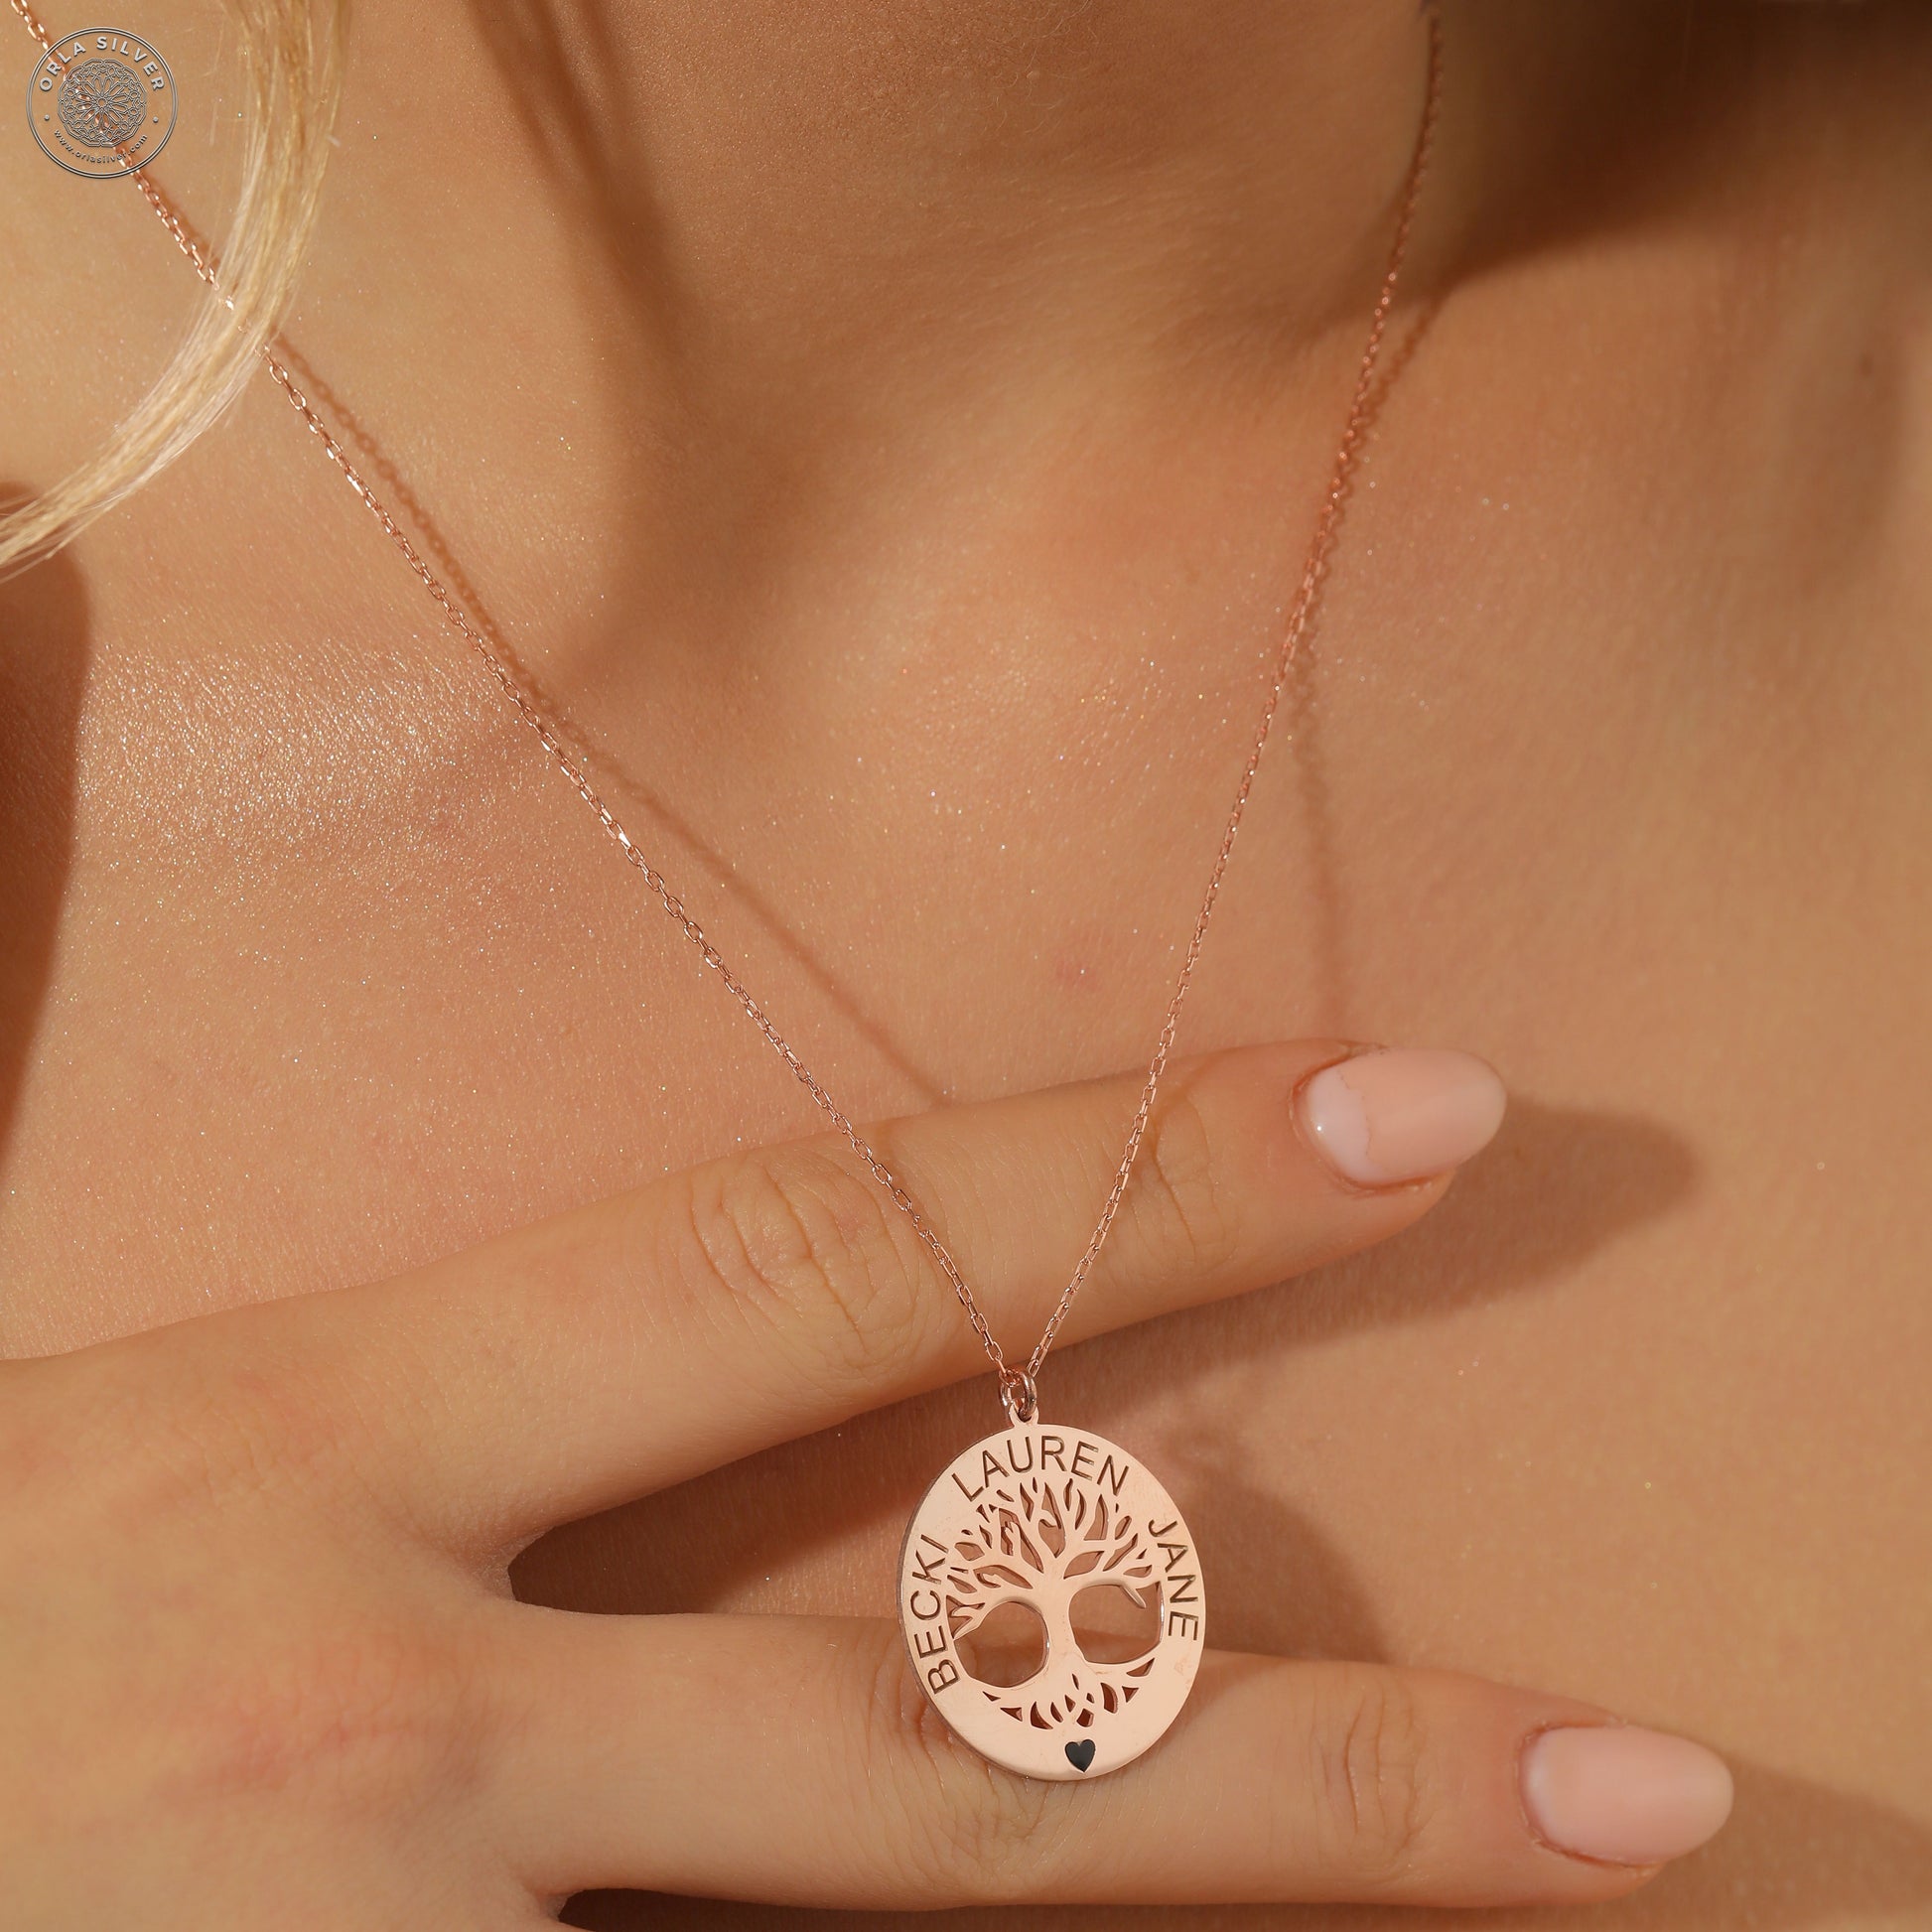 Name Engraved 925 Sterling Silver Tree of Life Women's Necklace -gold-rose